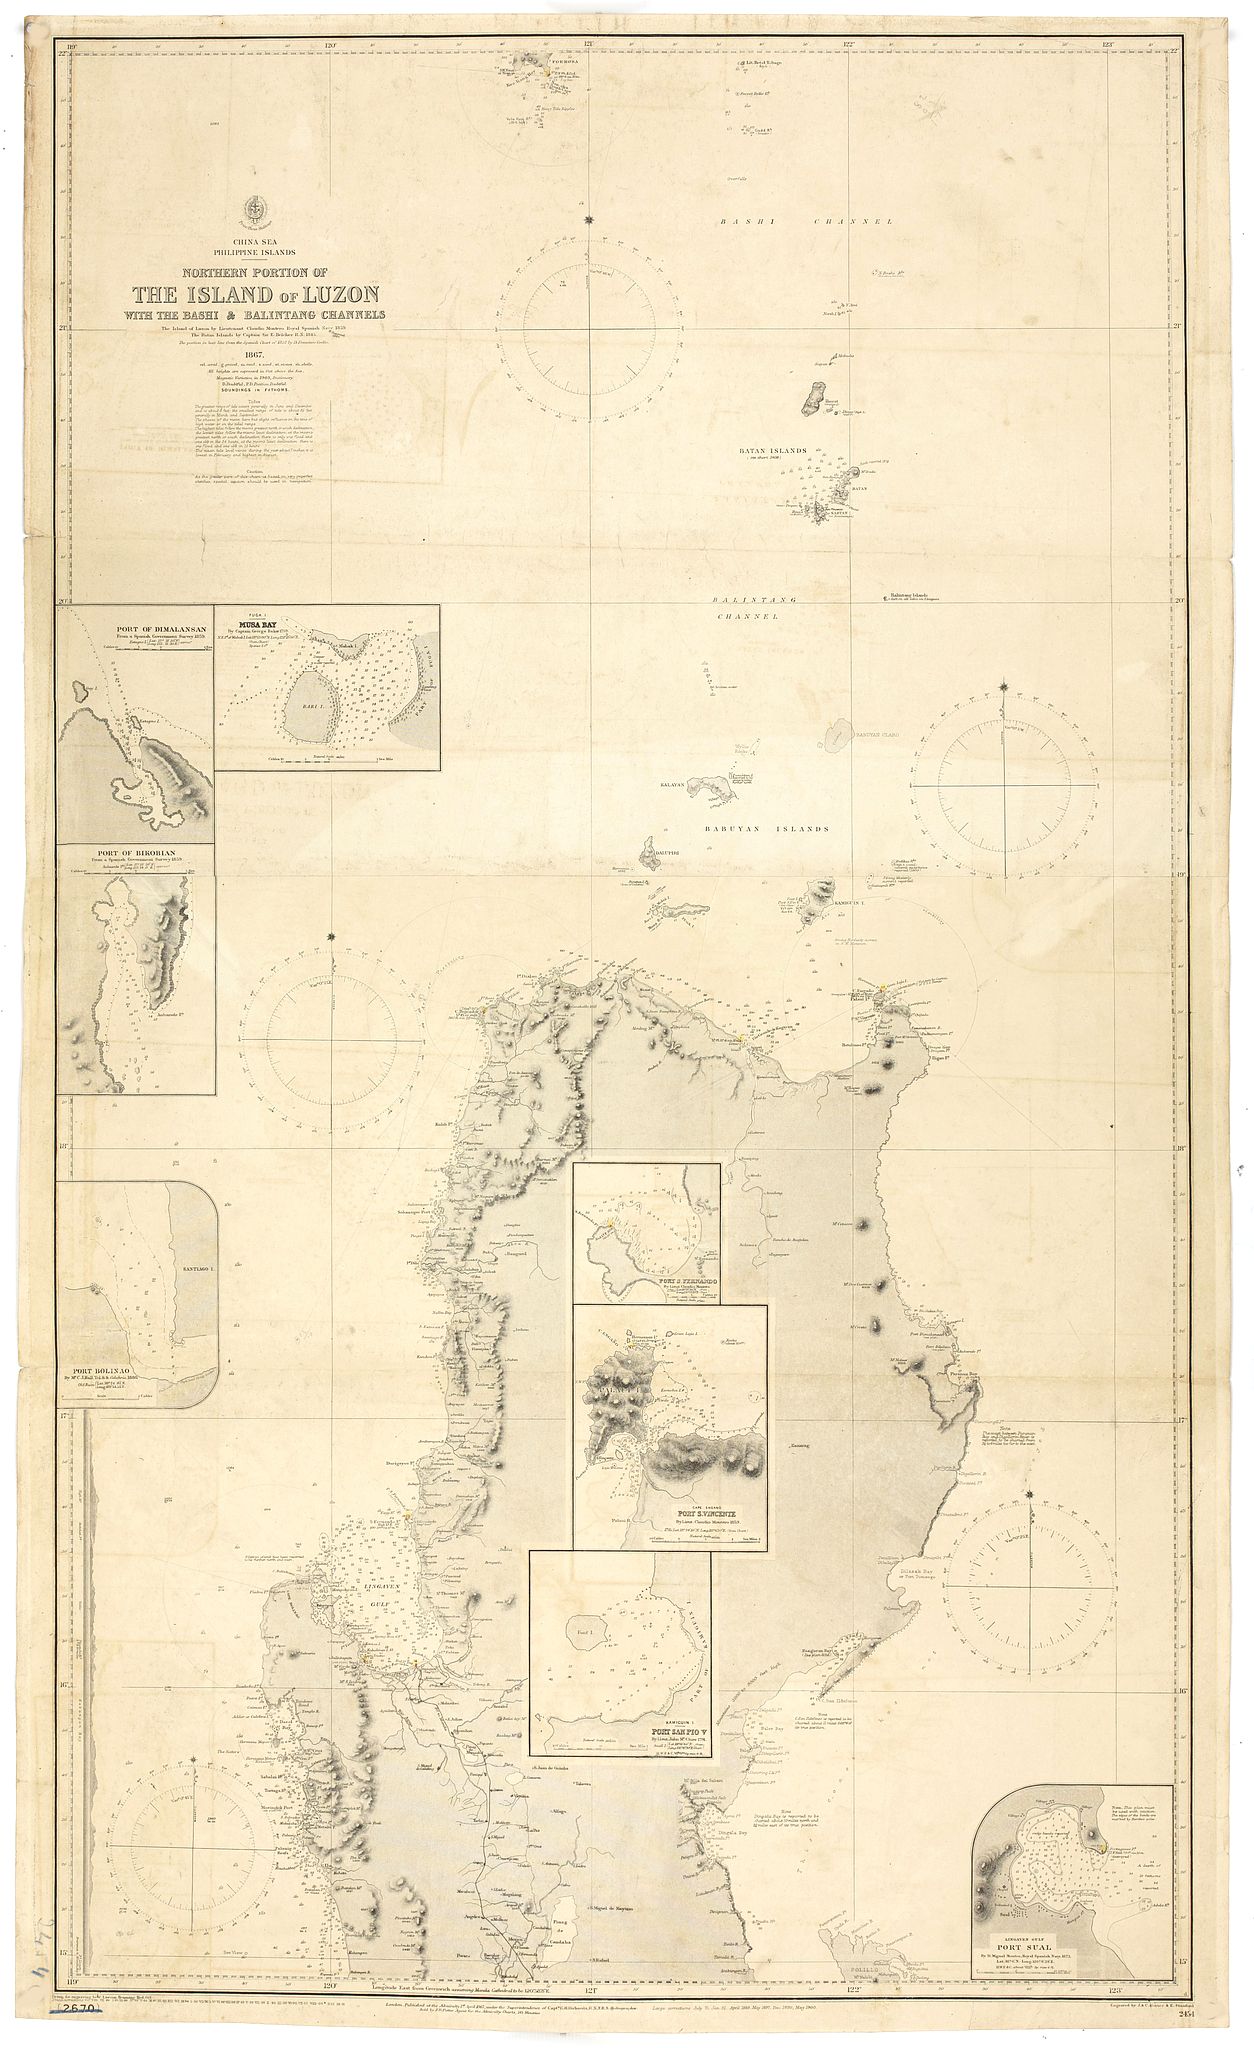 Northern Portion of The Island of Luzon with the Bashi & Balintang Channels The Island of Luzon by Lieutenant Claudio Montero Royal Spanish Navy 1859 The Batan Islands by Captain Sir. E. Belcher R.N. 1845